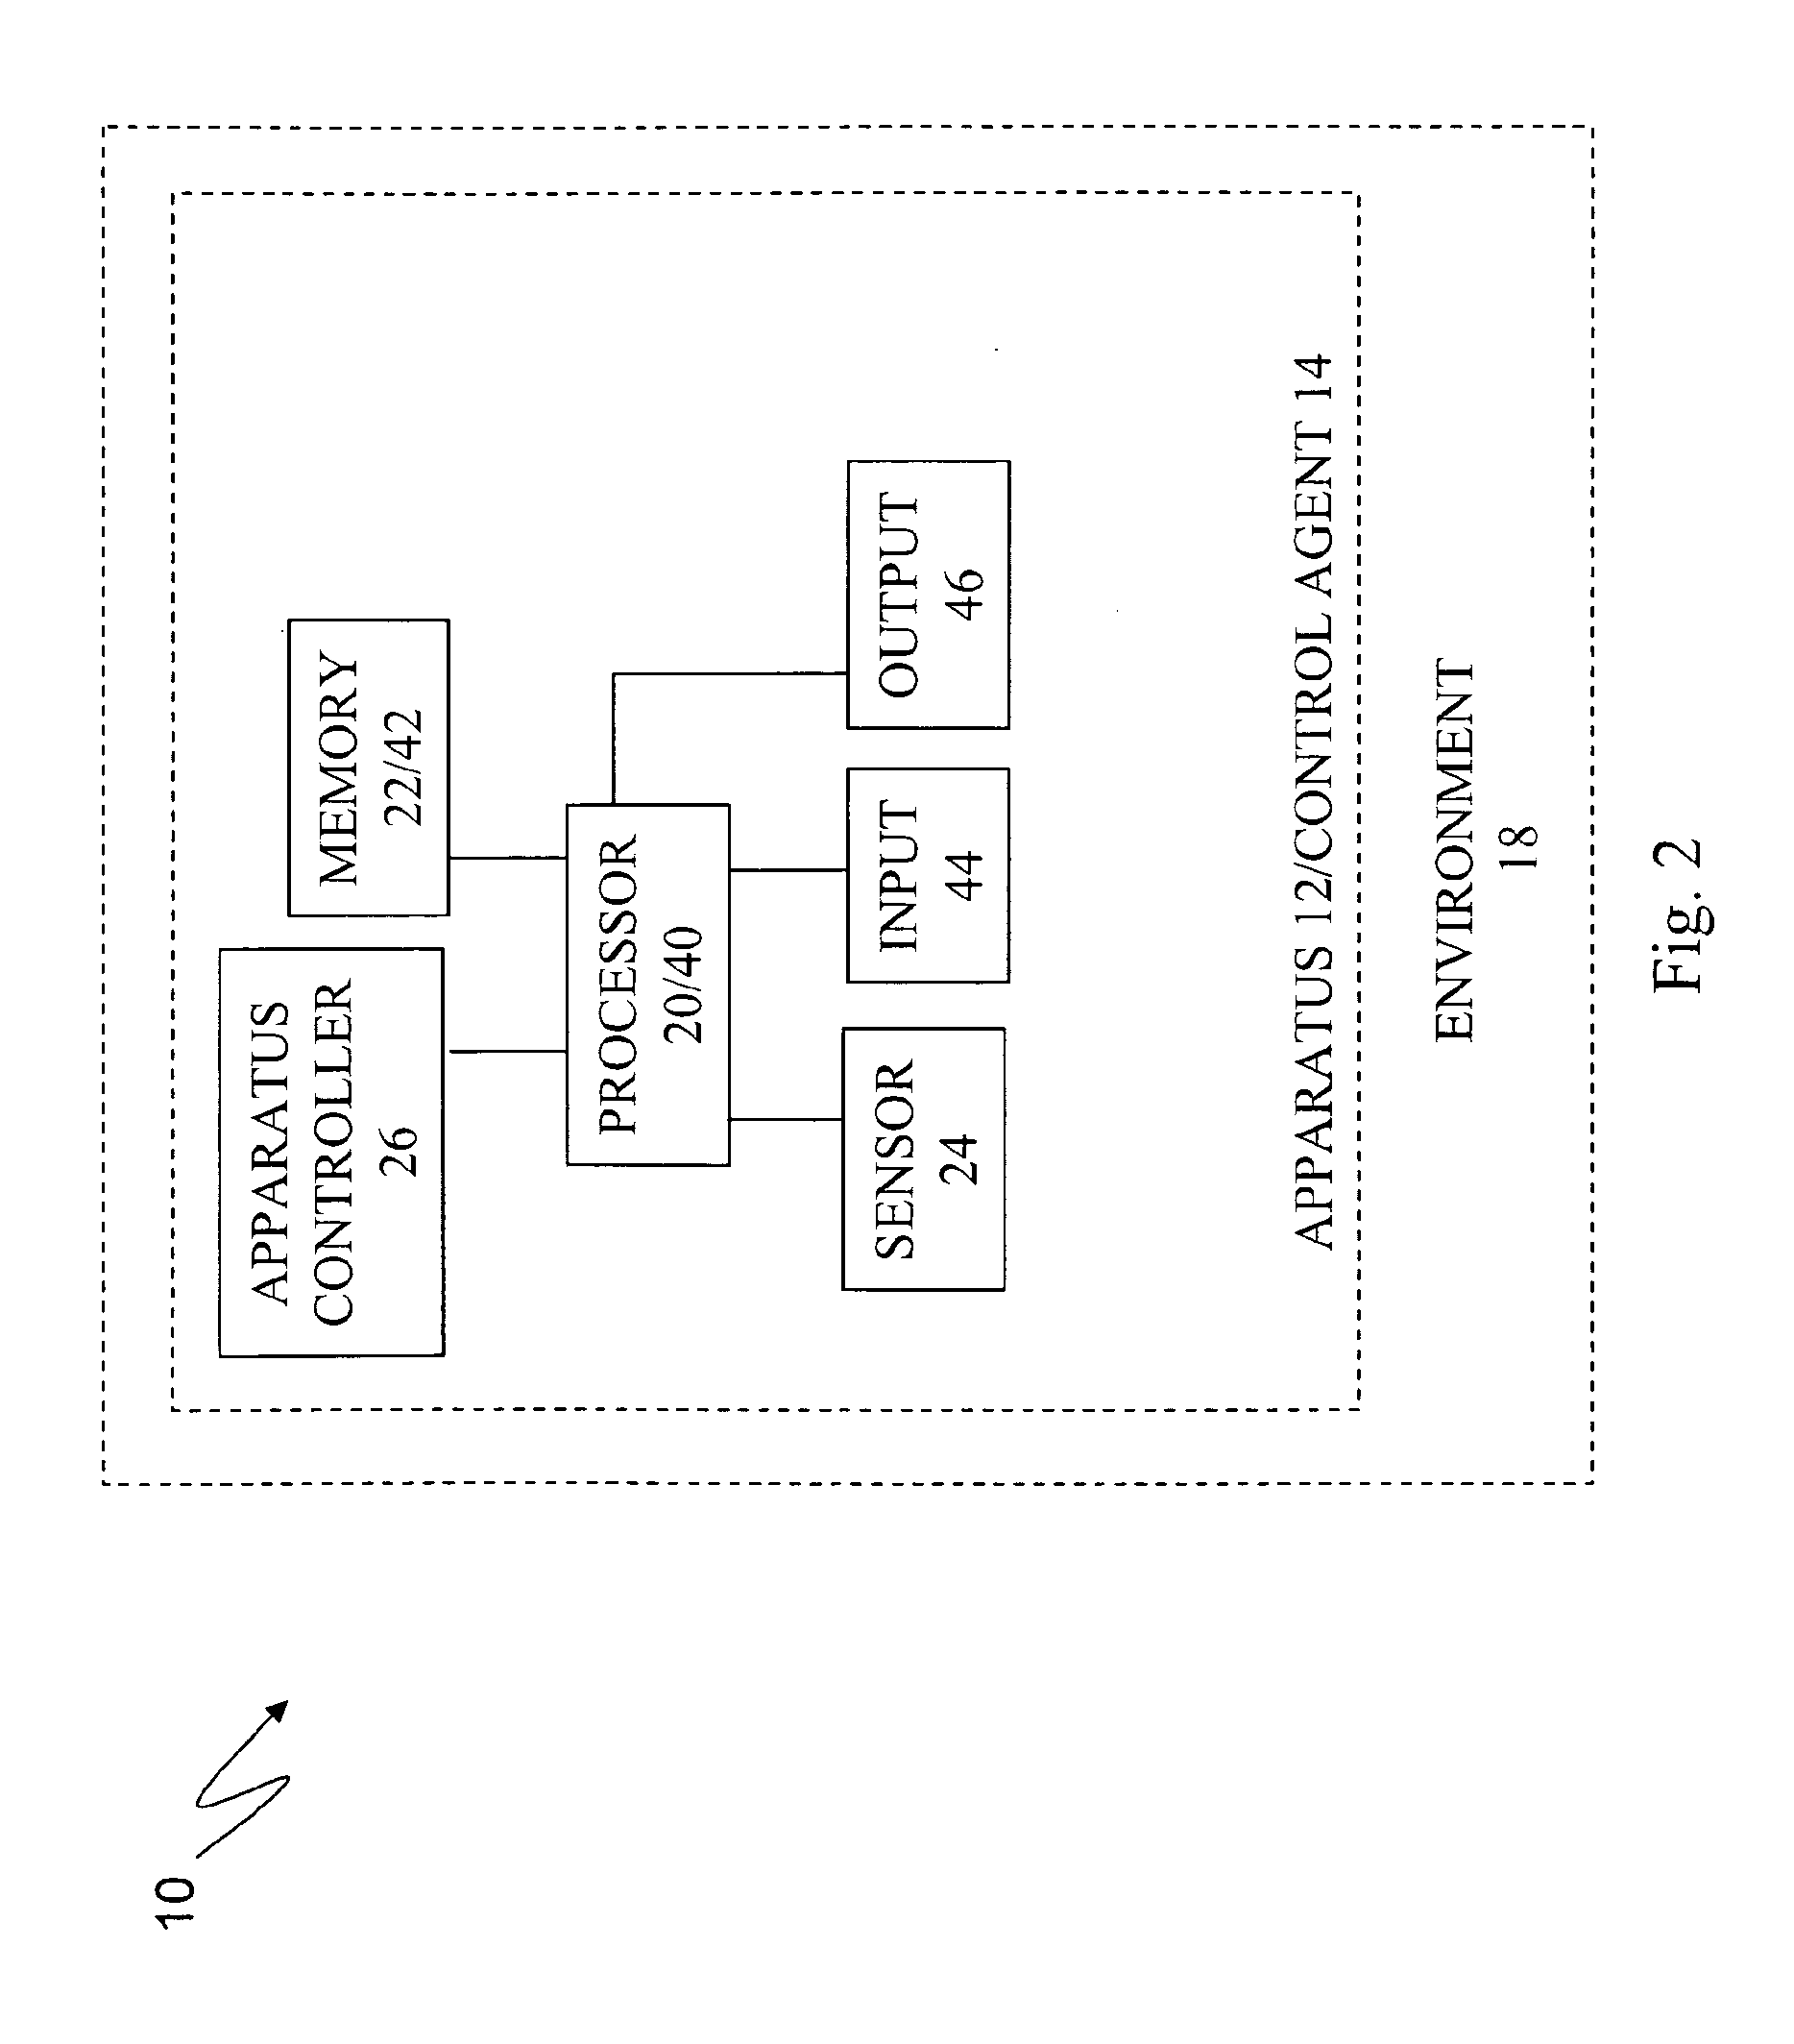 Apparatuses, Systems, and Methods for Apparatus Operation and Remote Sensing